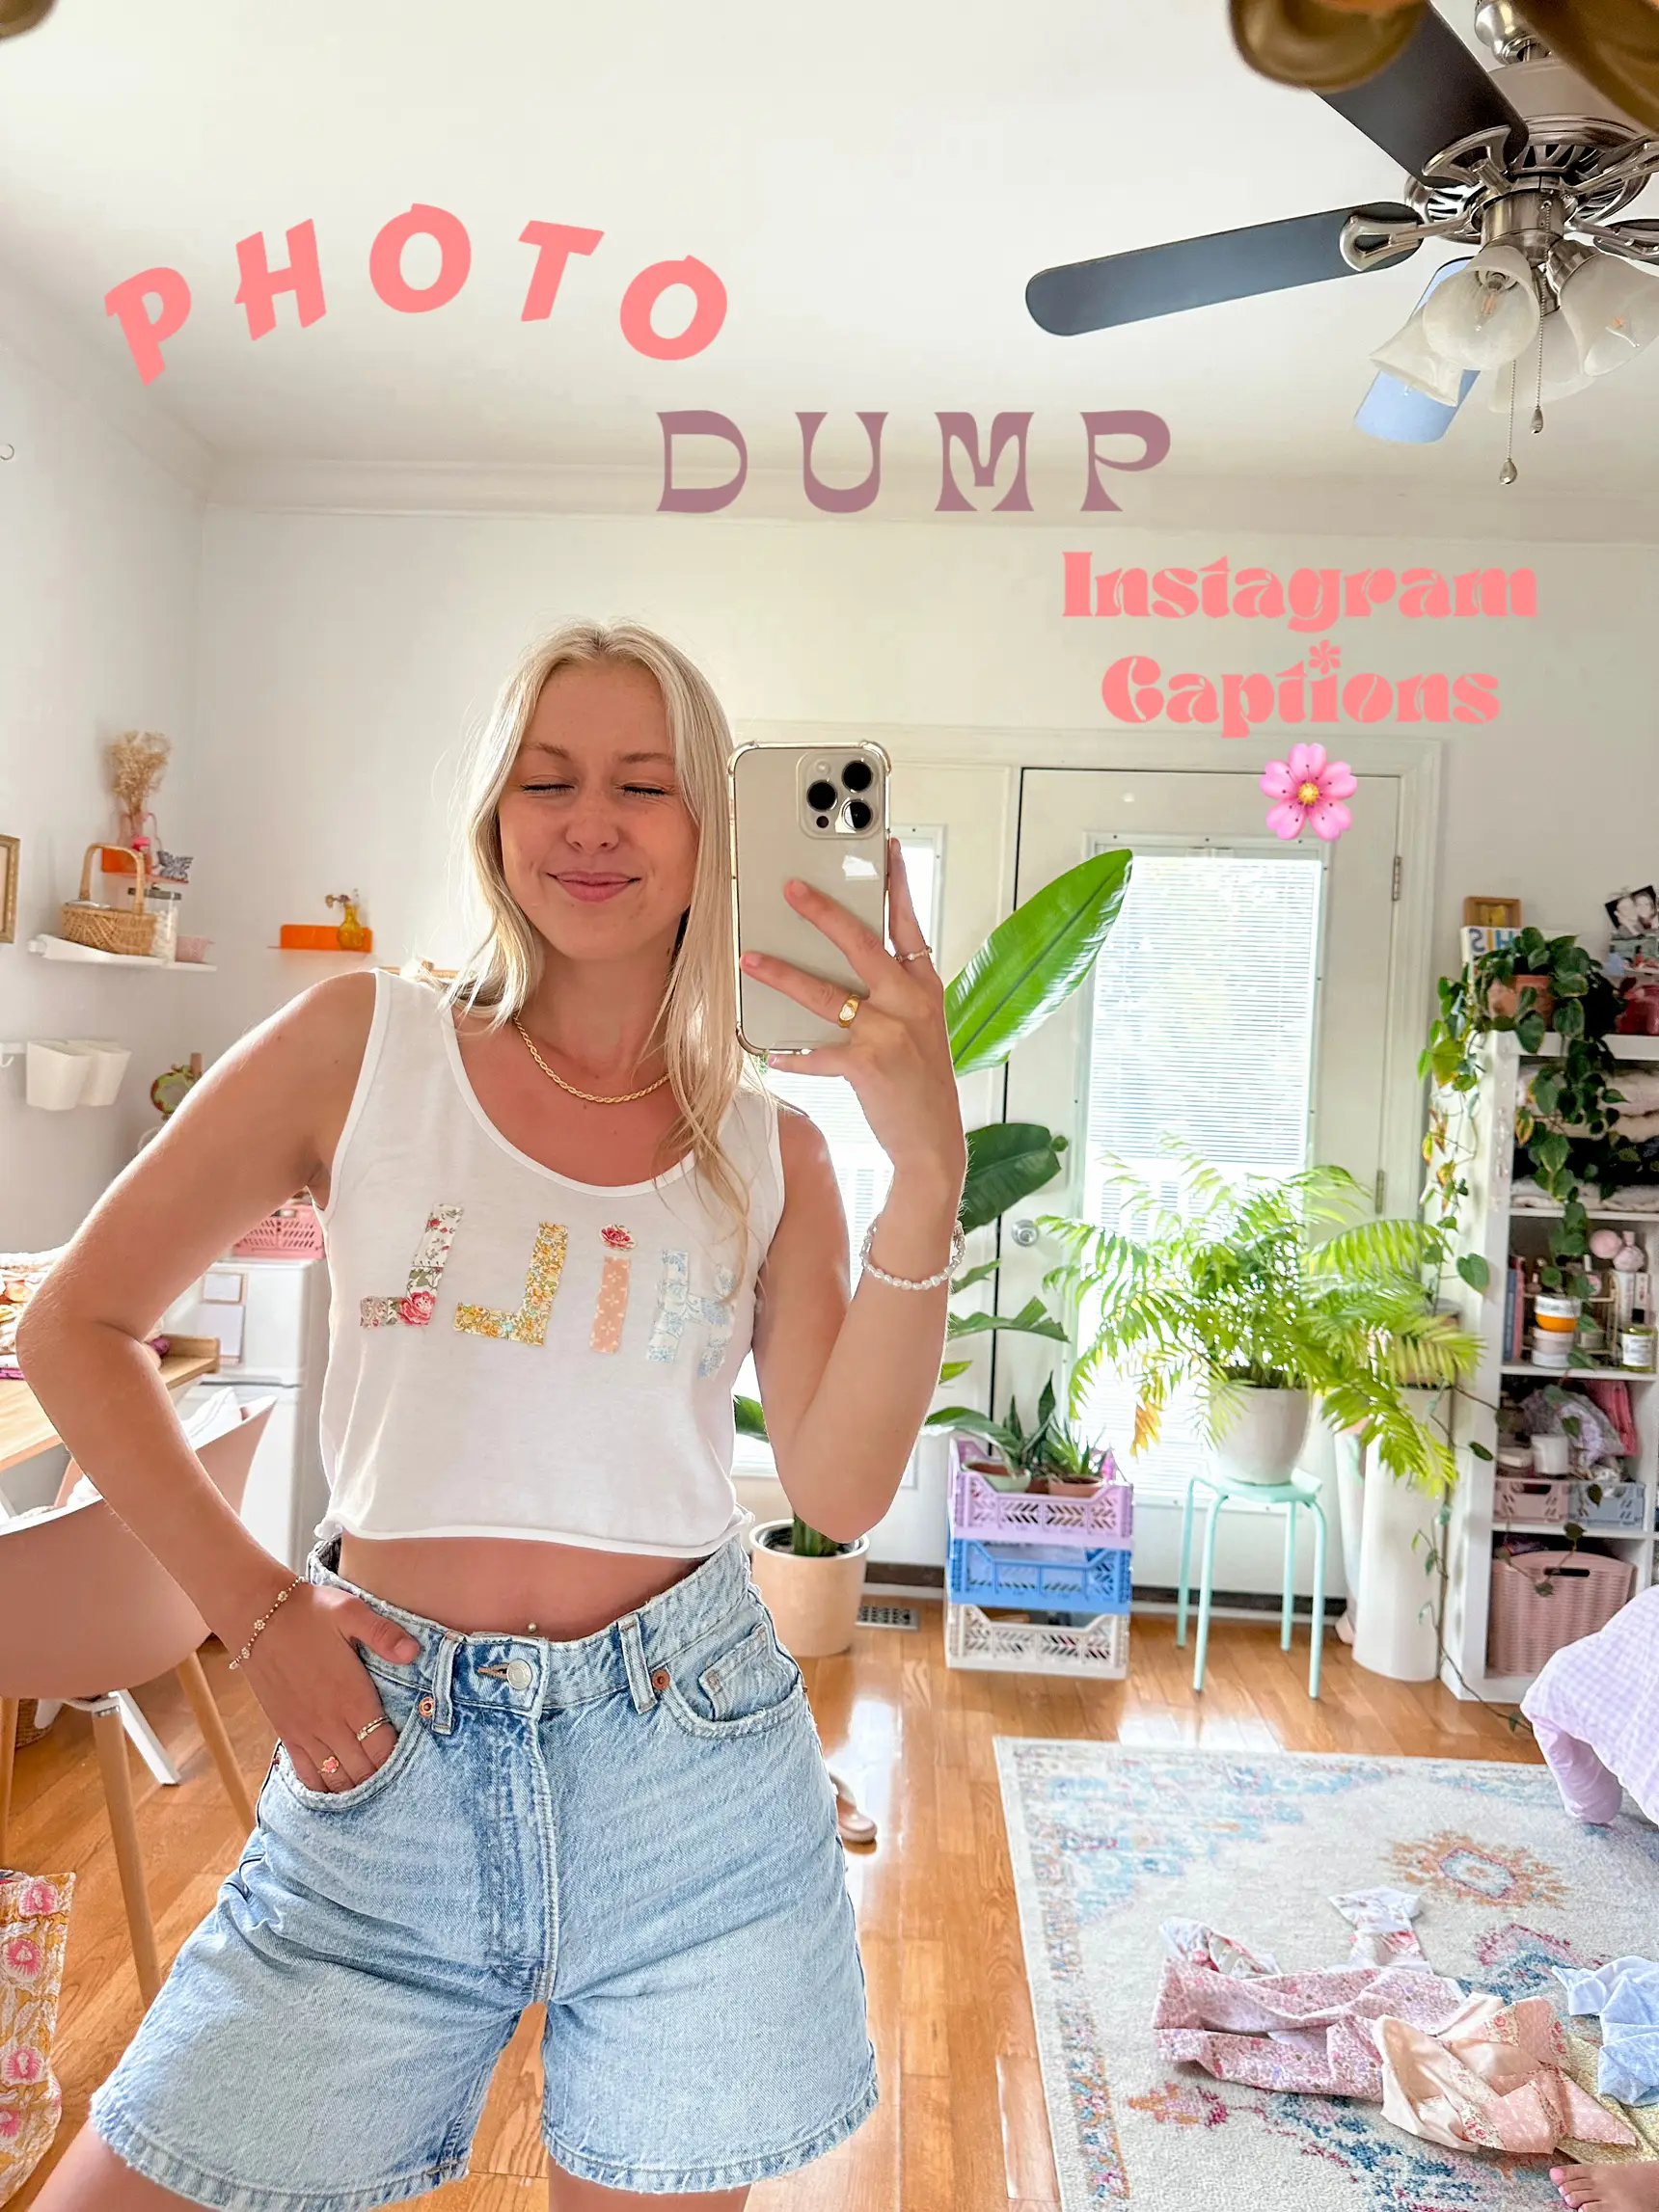  A woman in a blue shirt and white shorts is taking a selfie in a room.